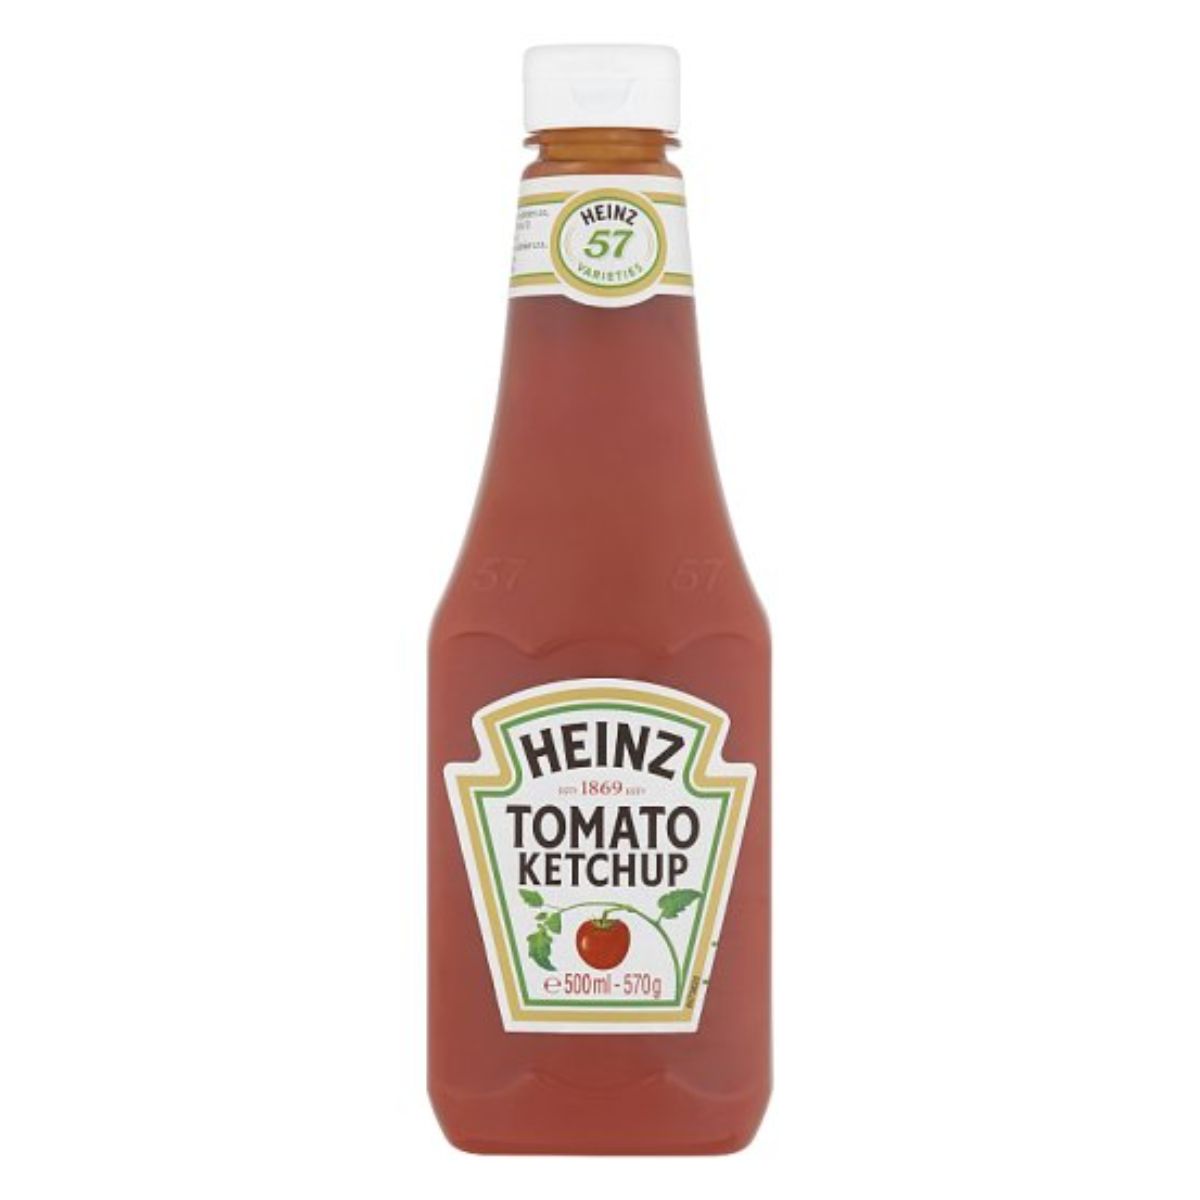 A bottle of Heinz - Tomato Ketchup - 570g.